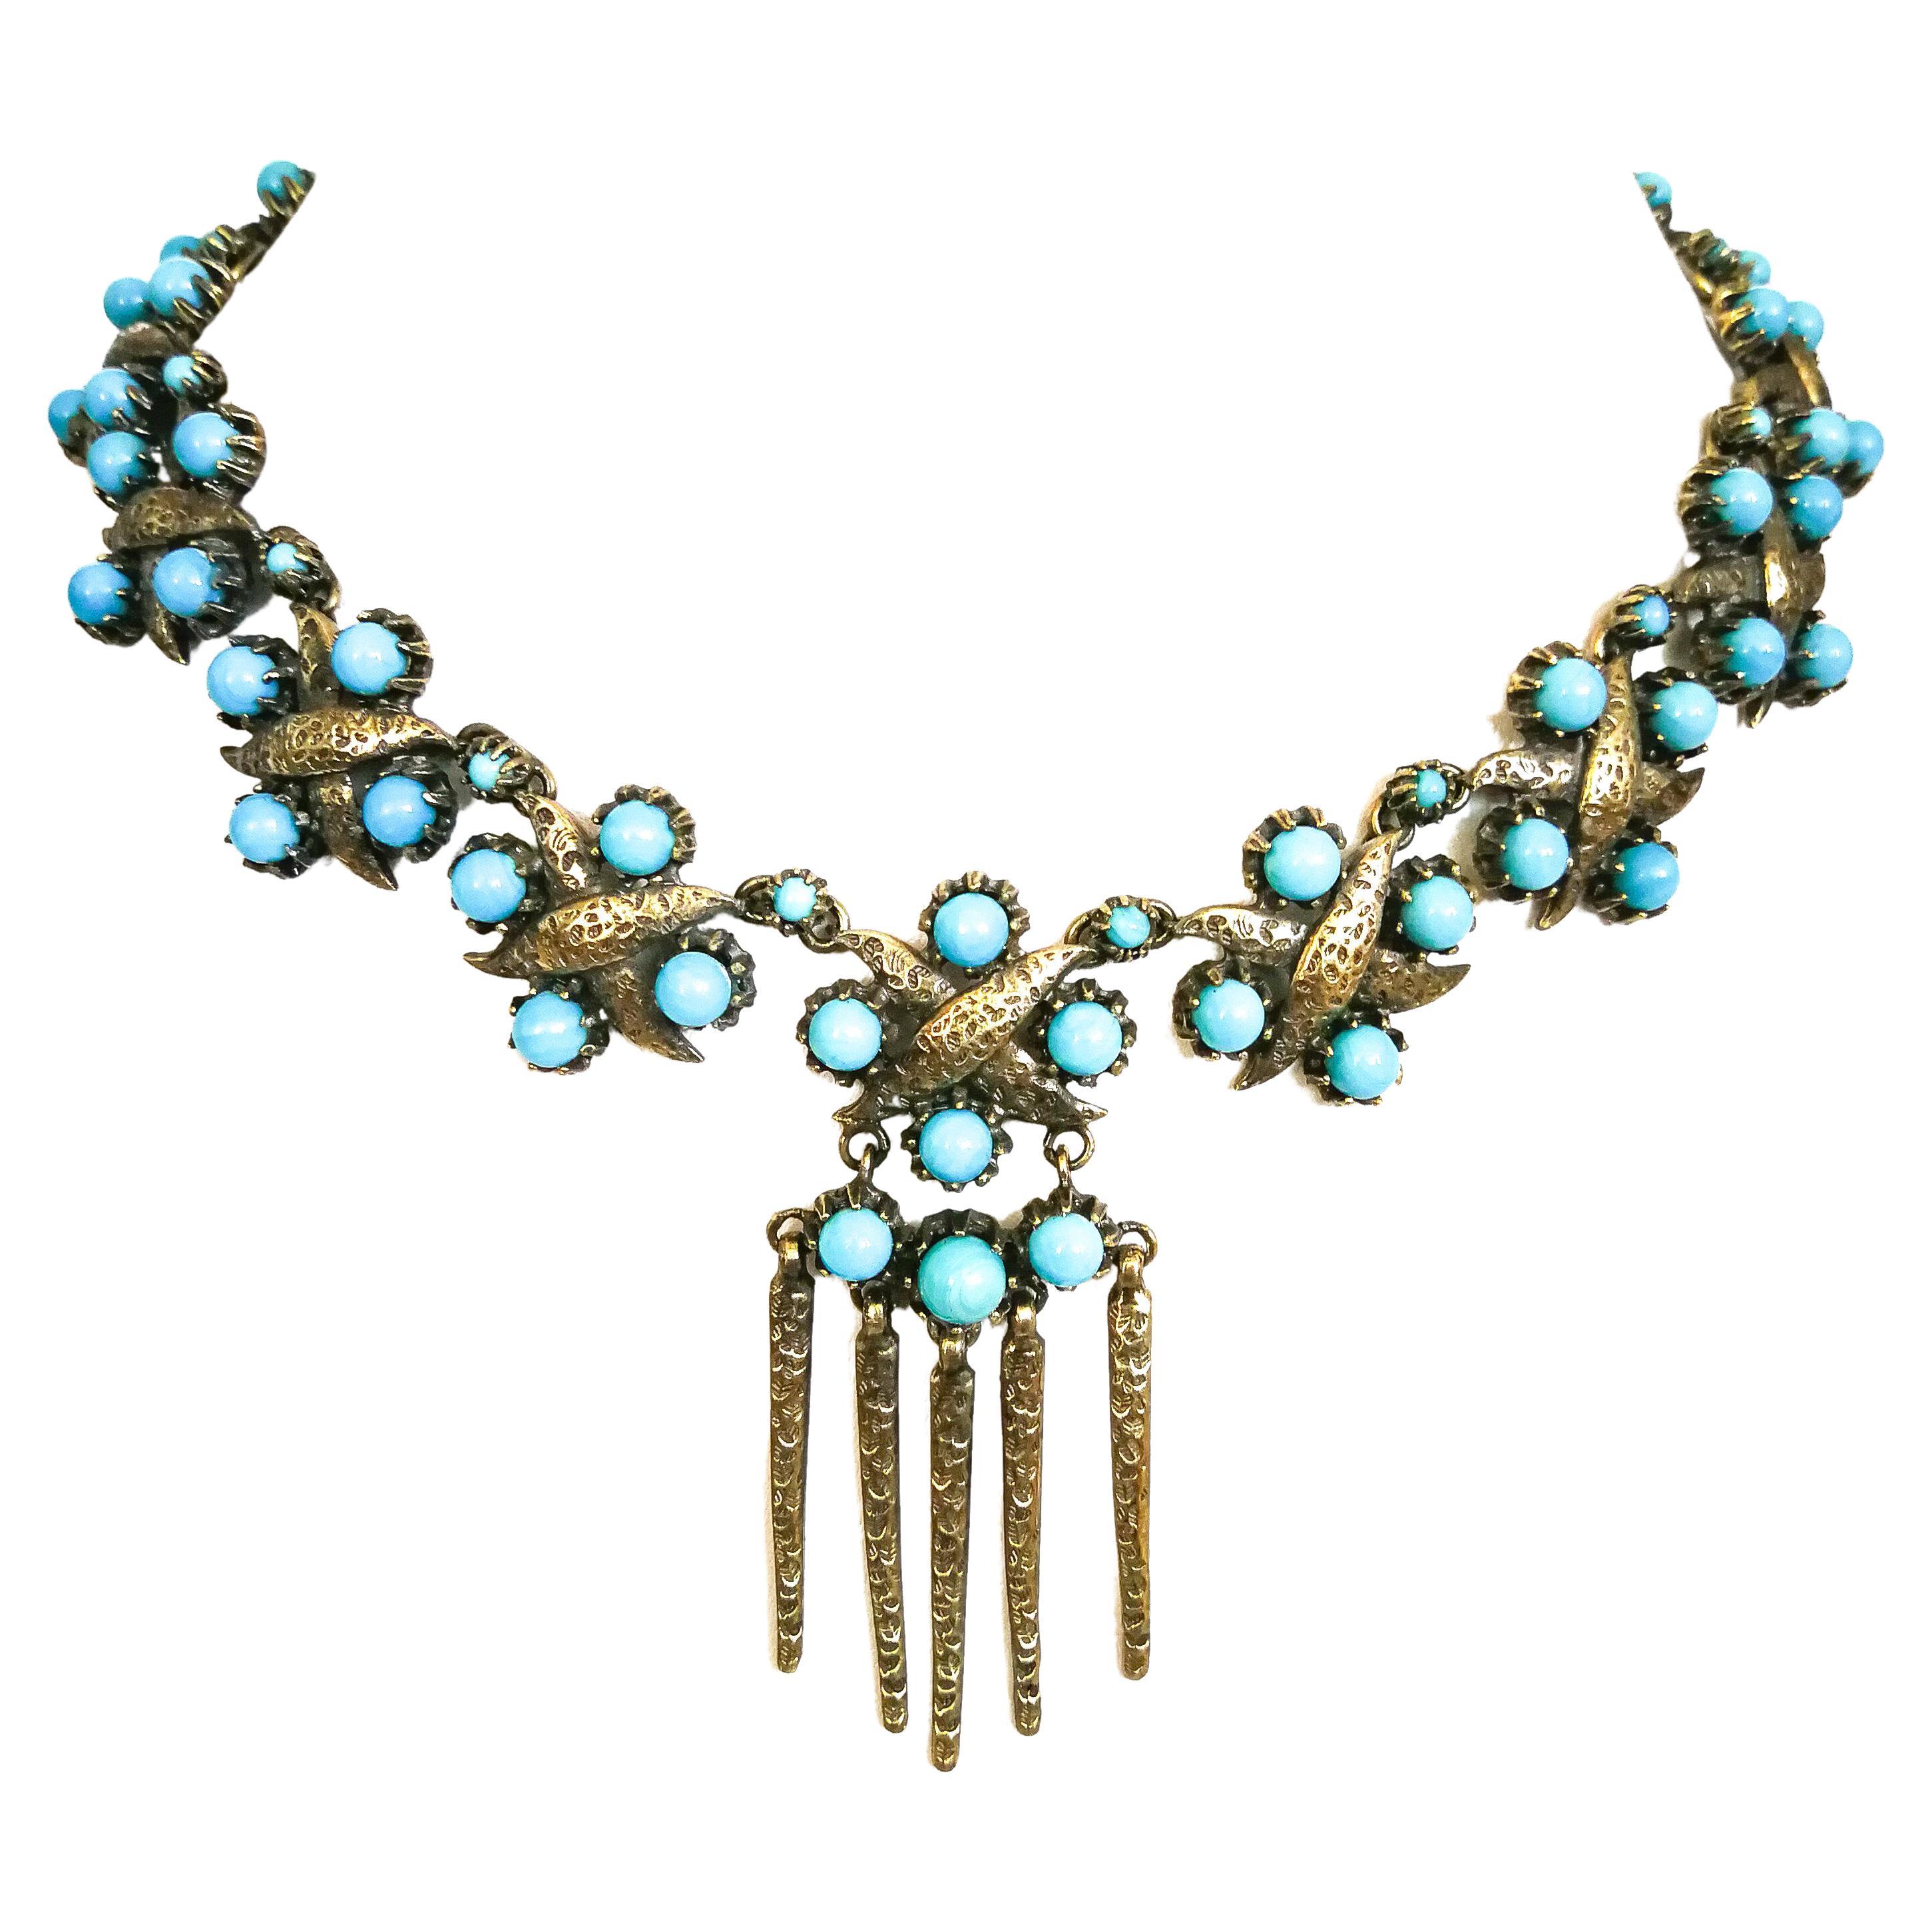 A gilt metal and turquoise glass bead sautoir necklace, Christian Dior, 1950s. For Sale